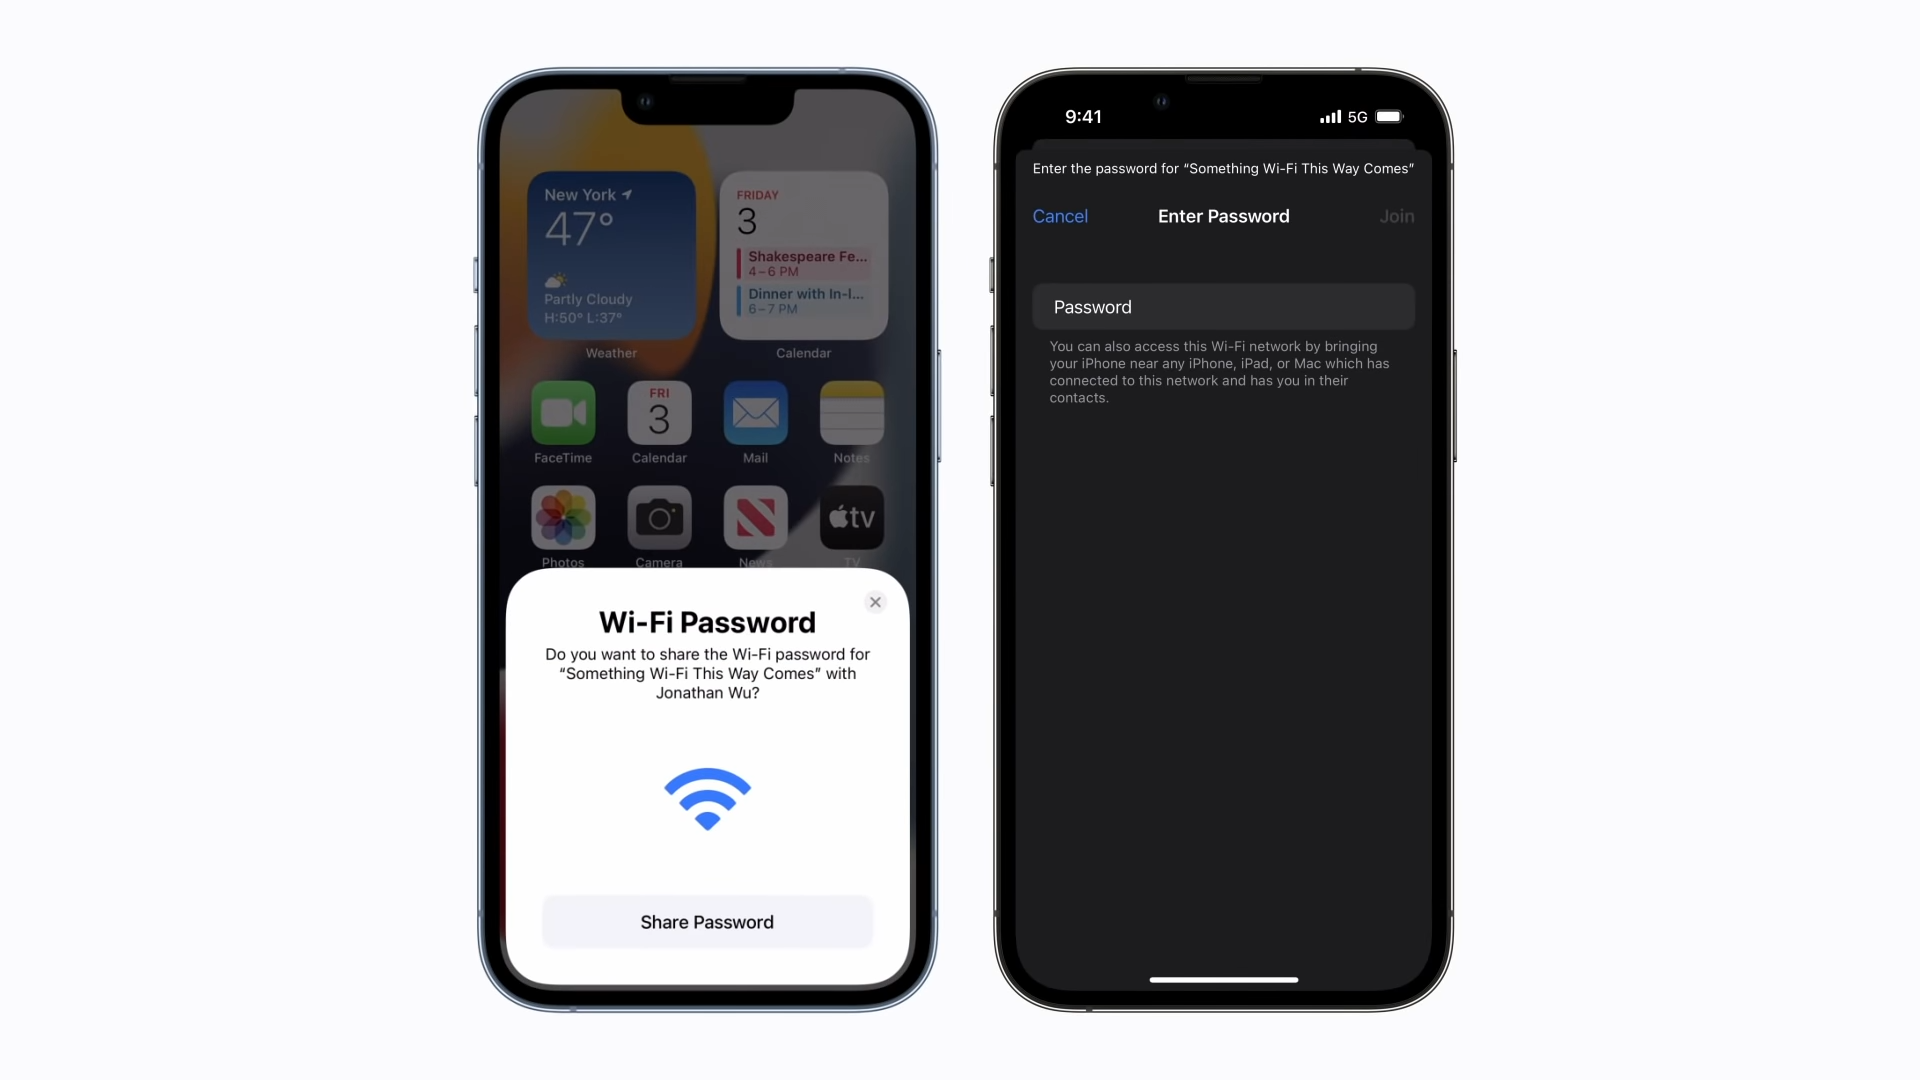 How to share iPhone to iPhone WiFi password